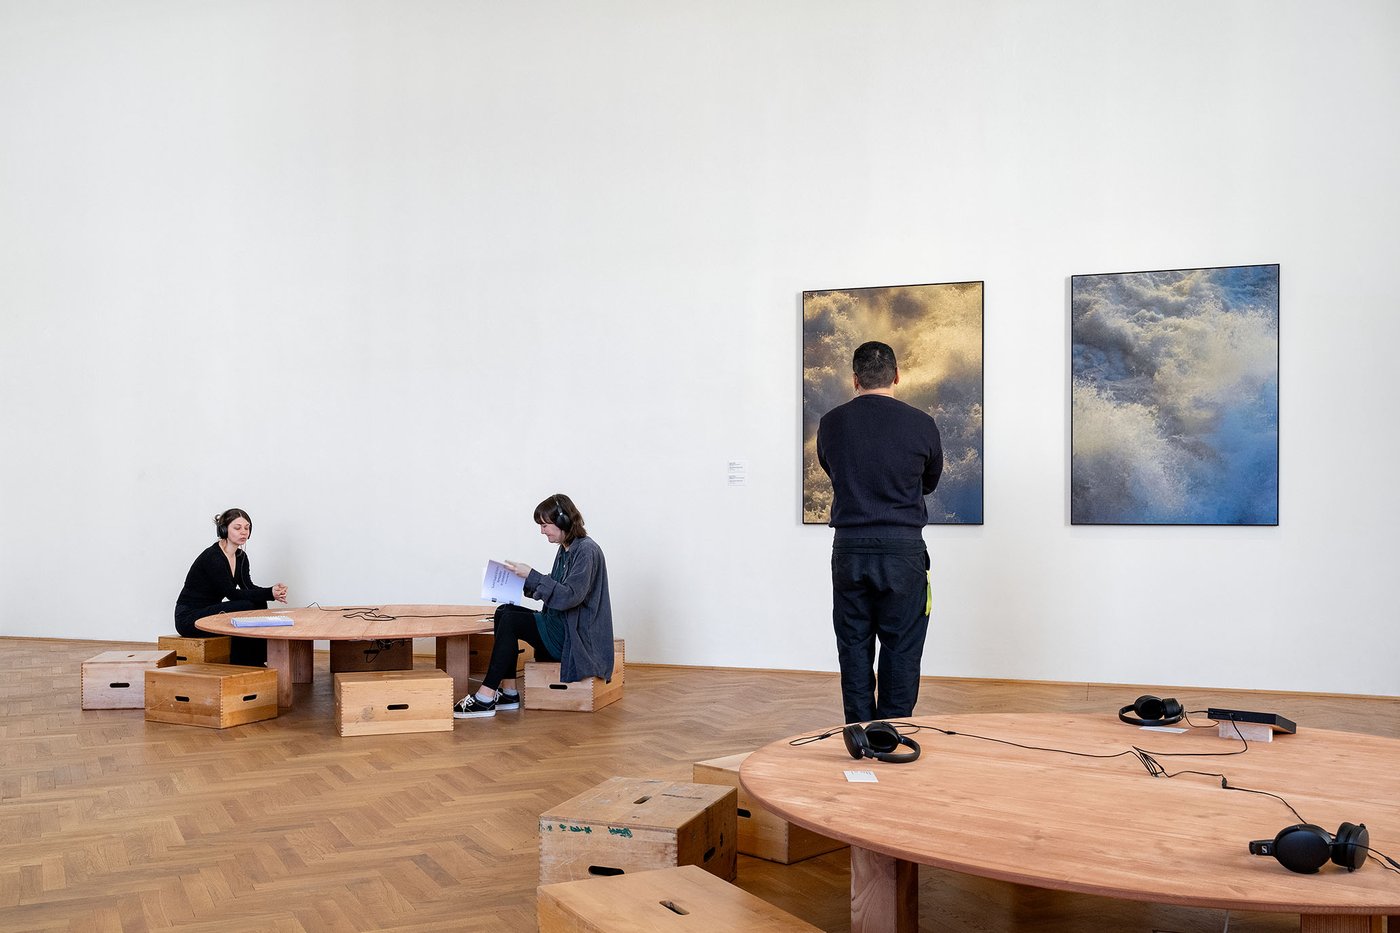 exhibition view space 3 persons, round table, 2 pictures on the wall